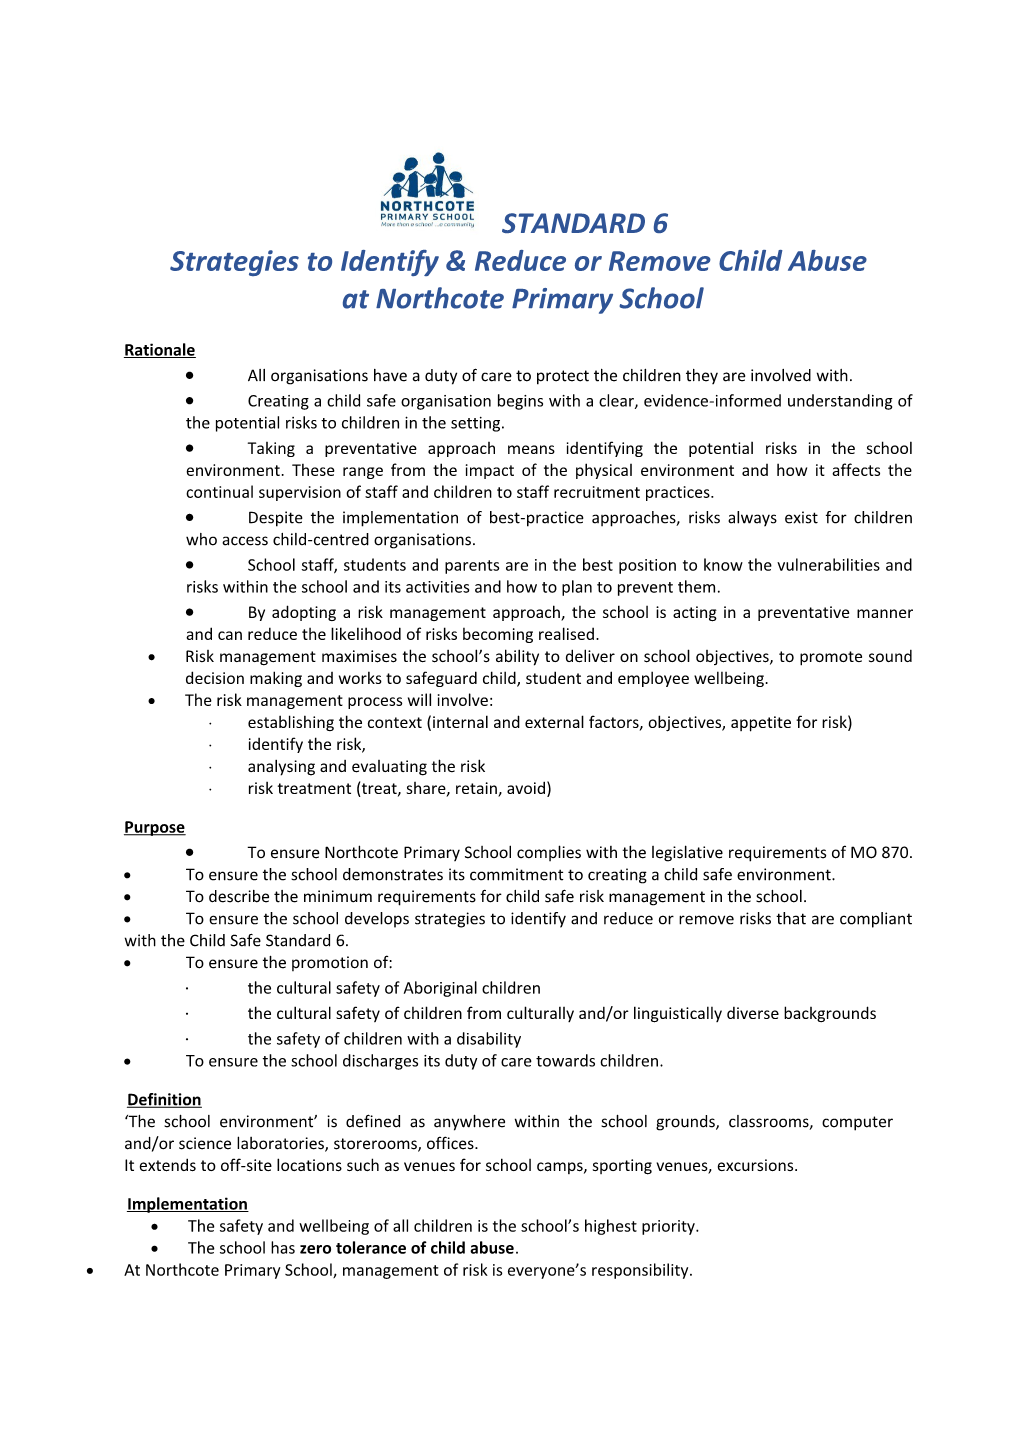 Strategies to Identify & Reduce Or Remove Child Abuse